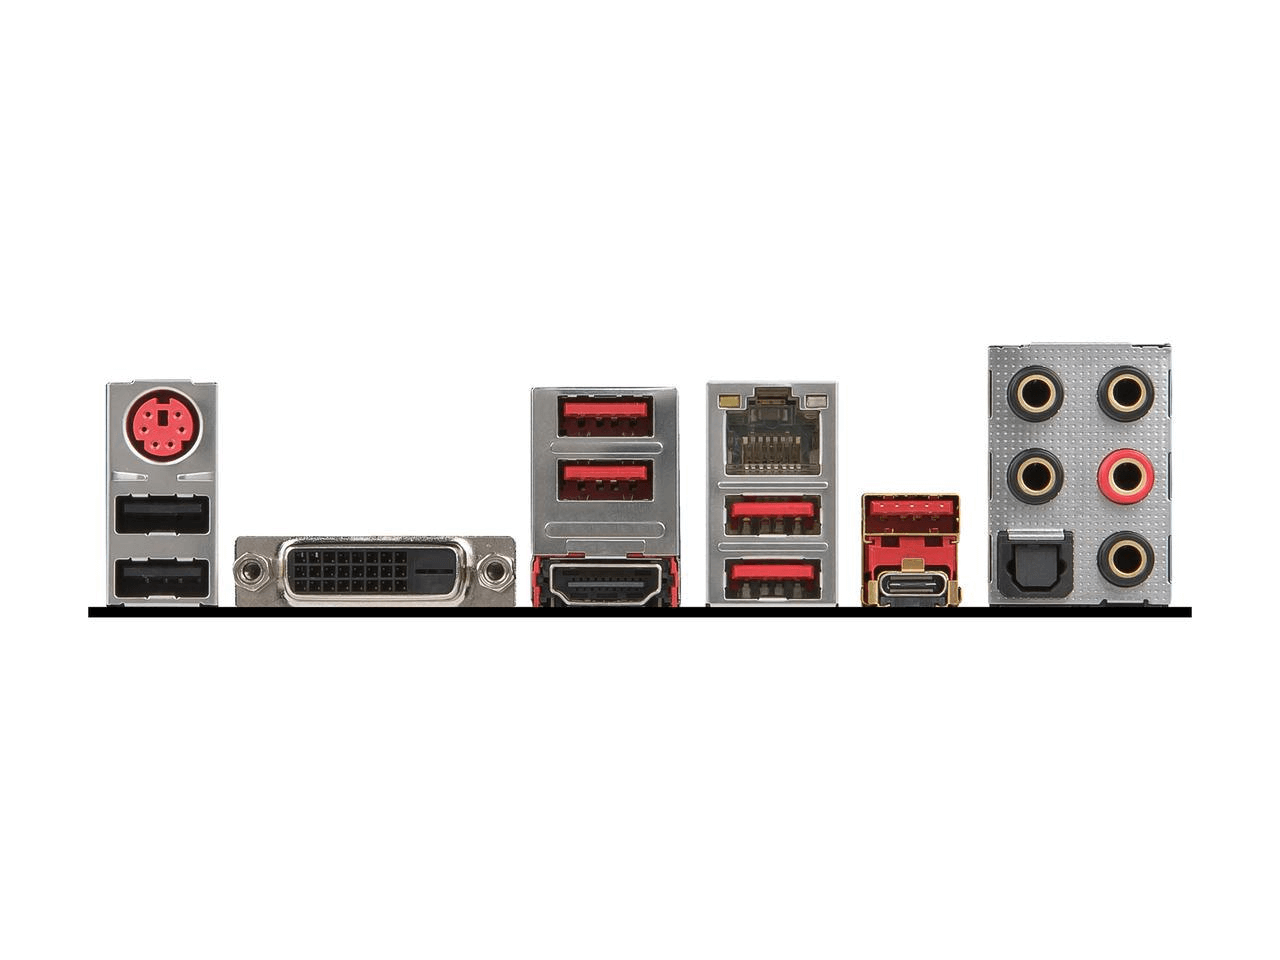 MSI X370 Gaming Pro Carbon Motherboard Ports